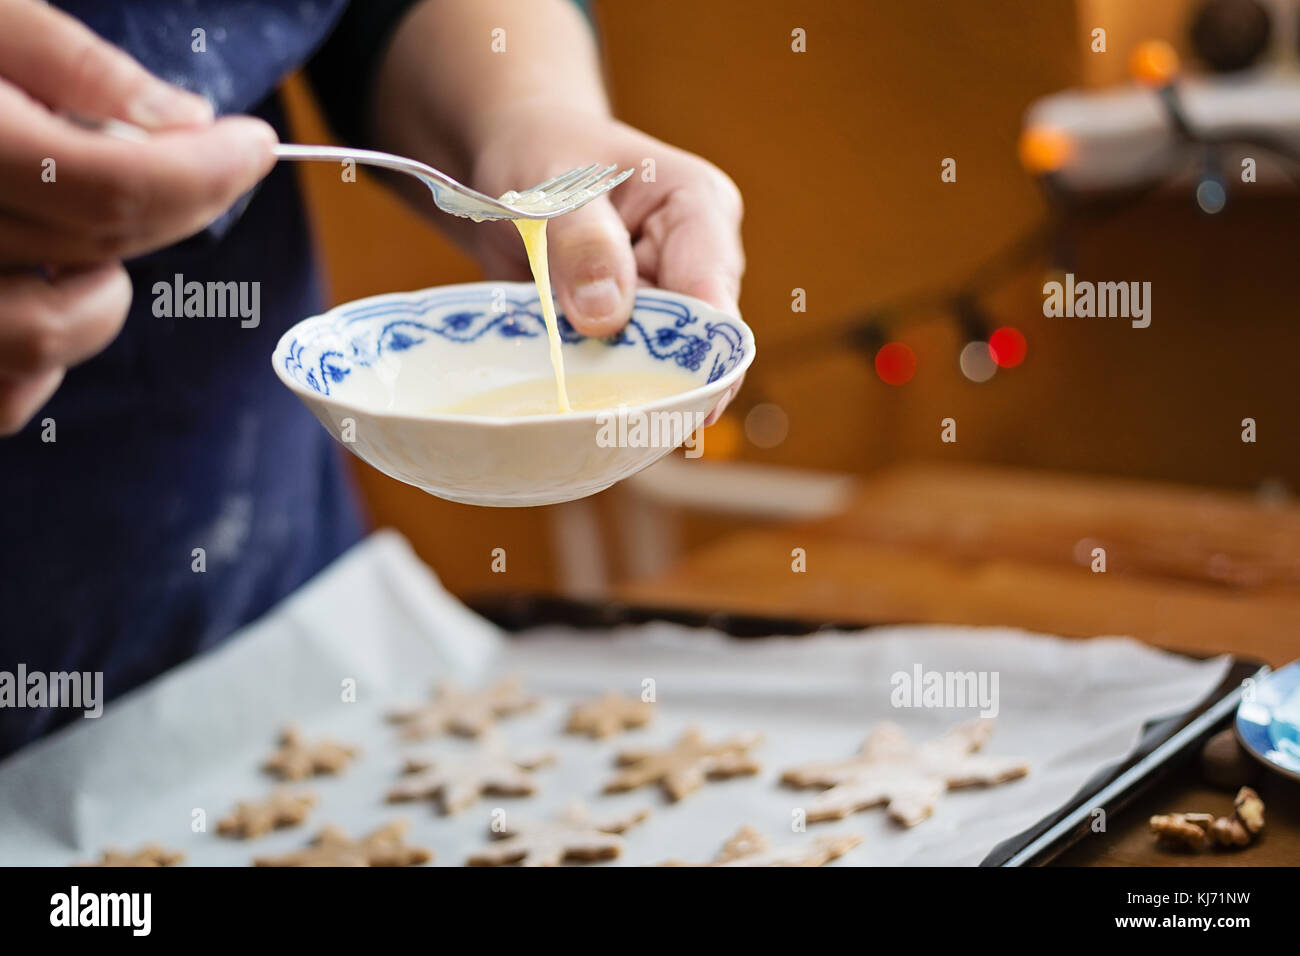 Woman checking the consistency of the mixed egg. She is holding a small bowl, and mixing an egg with a fork. Focus on hands. Baking at home for Christ Stock Photo